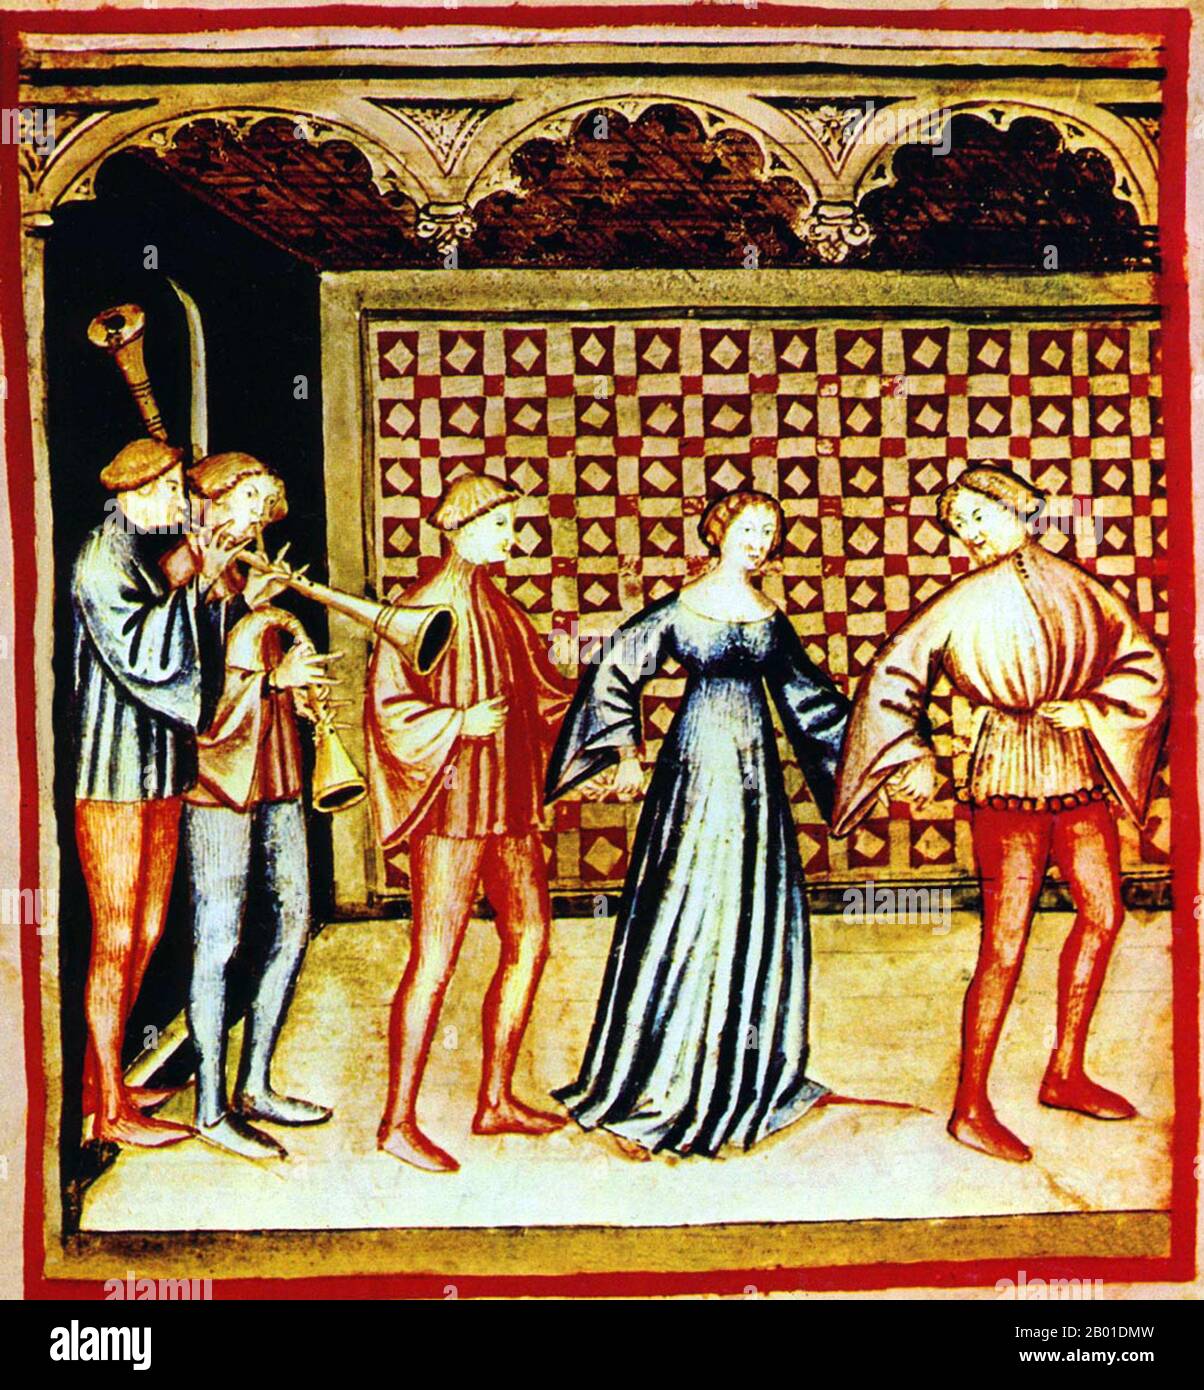 Iraq/Italy: Music and dance. Illustration from Ibn Butlan's Taqwim al-sihha or 'Maintenance of Health', published in Italy as the Tacuinum Sanitatis, 14th century.  The Tacuinum (sometimes Taccuinum) Sanitatis is a medieval handbook on health and wellbeing, based on the Taqwim al‑sihha, an eleventh-century Arab medical treatise by Ibn Butlan of Baghdad.  Ibn Butlân was a Christian physician born in Baghdad and who died in 1068.  He set forth six elements necessary to maintain daily health. Stock Photo